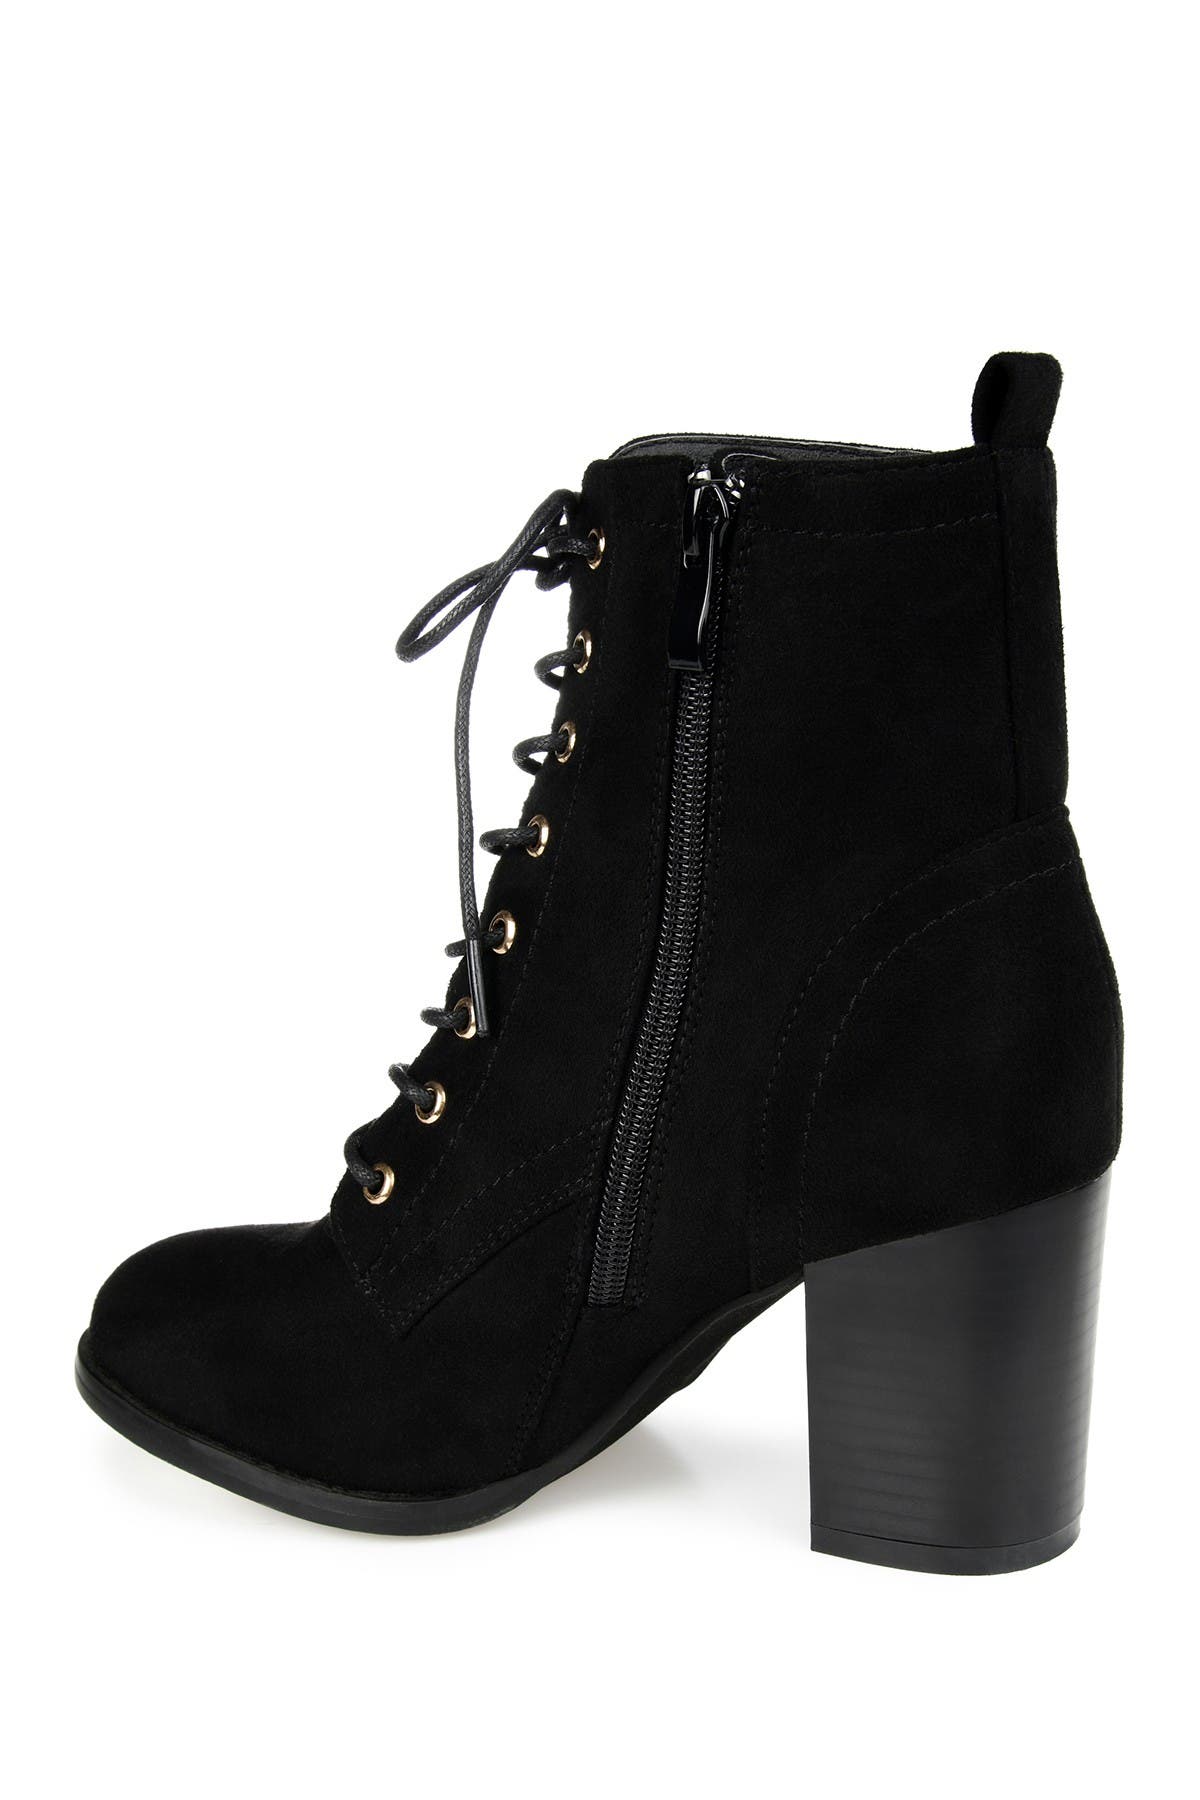 JOURNEE Collection | Baylor Lace-Up Boot | Nordstrom Rack